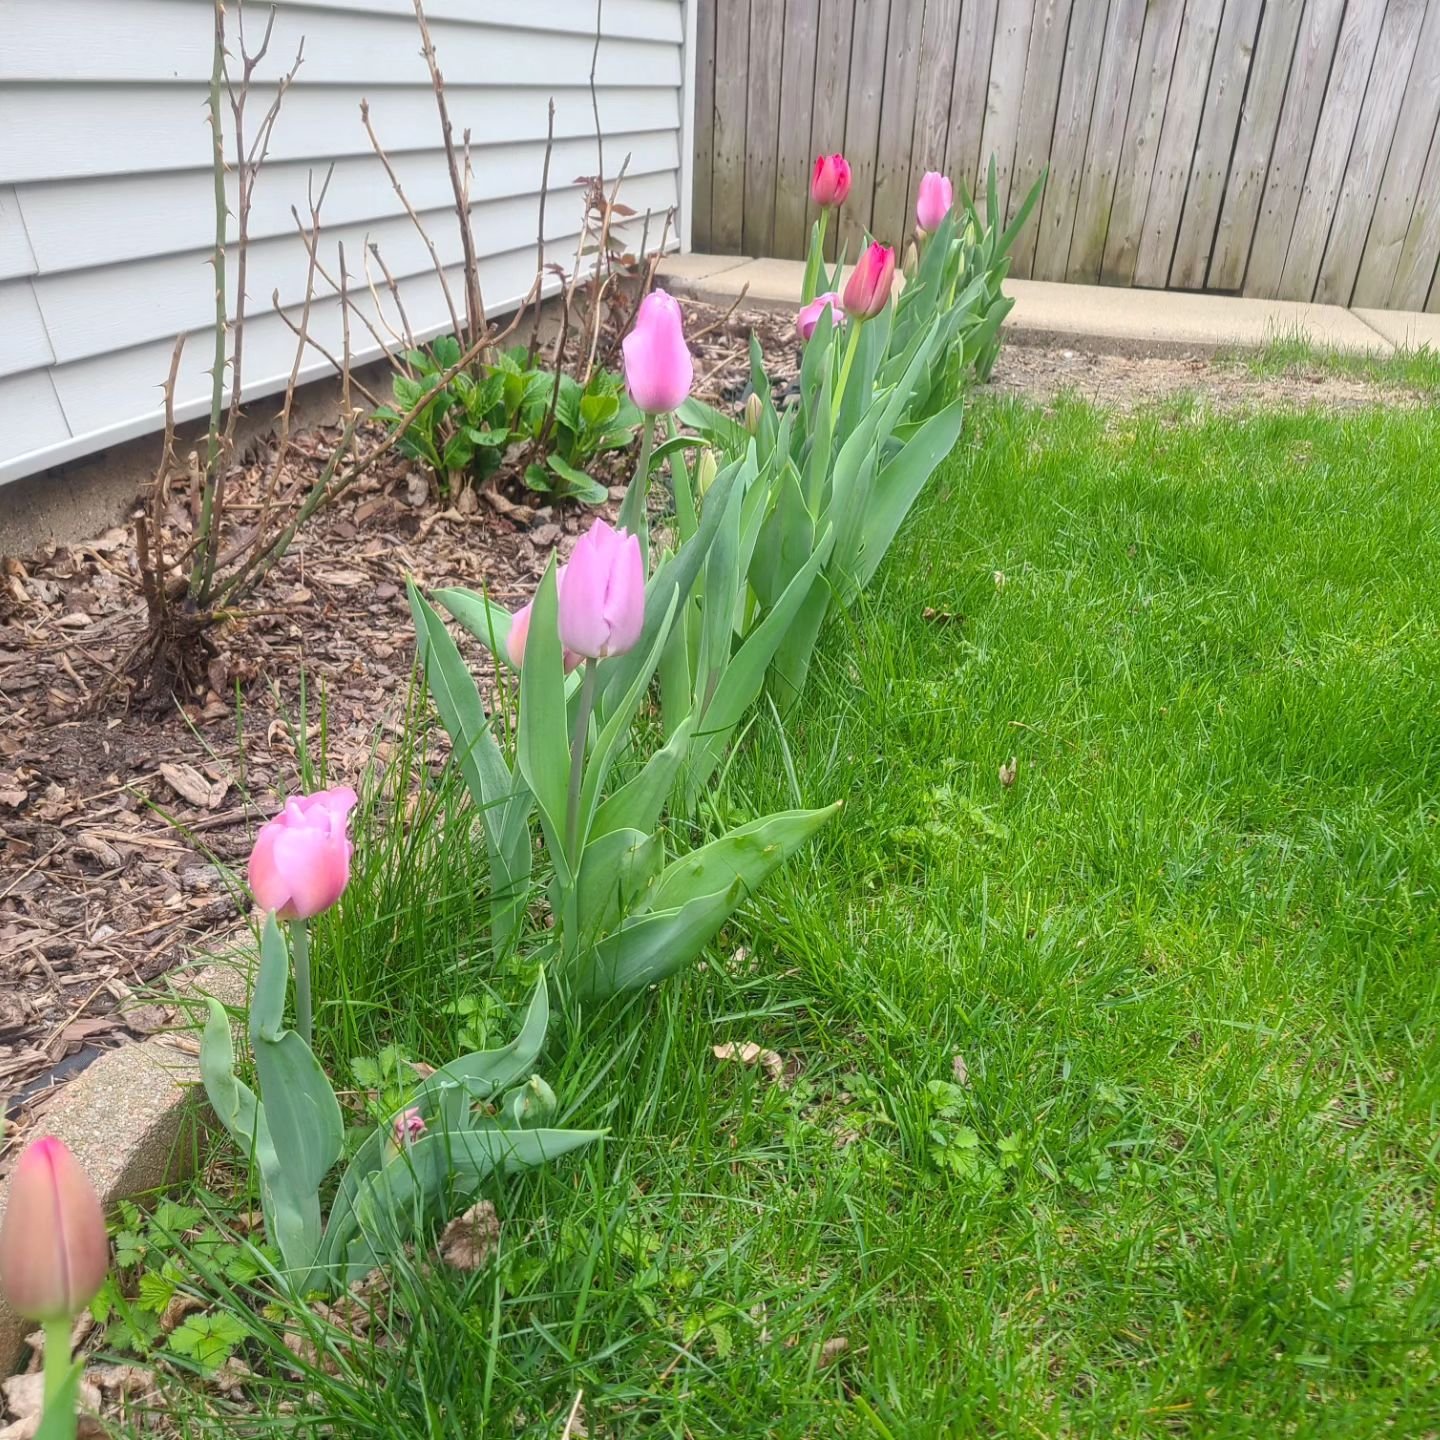 Garden update! The tulips and daffodil bulbs I planted last fall have done amazingly well, we remulched our front beds (back bed pending) and I finally figured out how to arrange the plants in my office planter (that's cat grass at the bottom for Yun